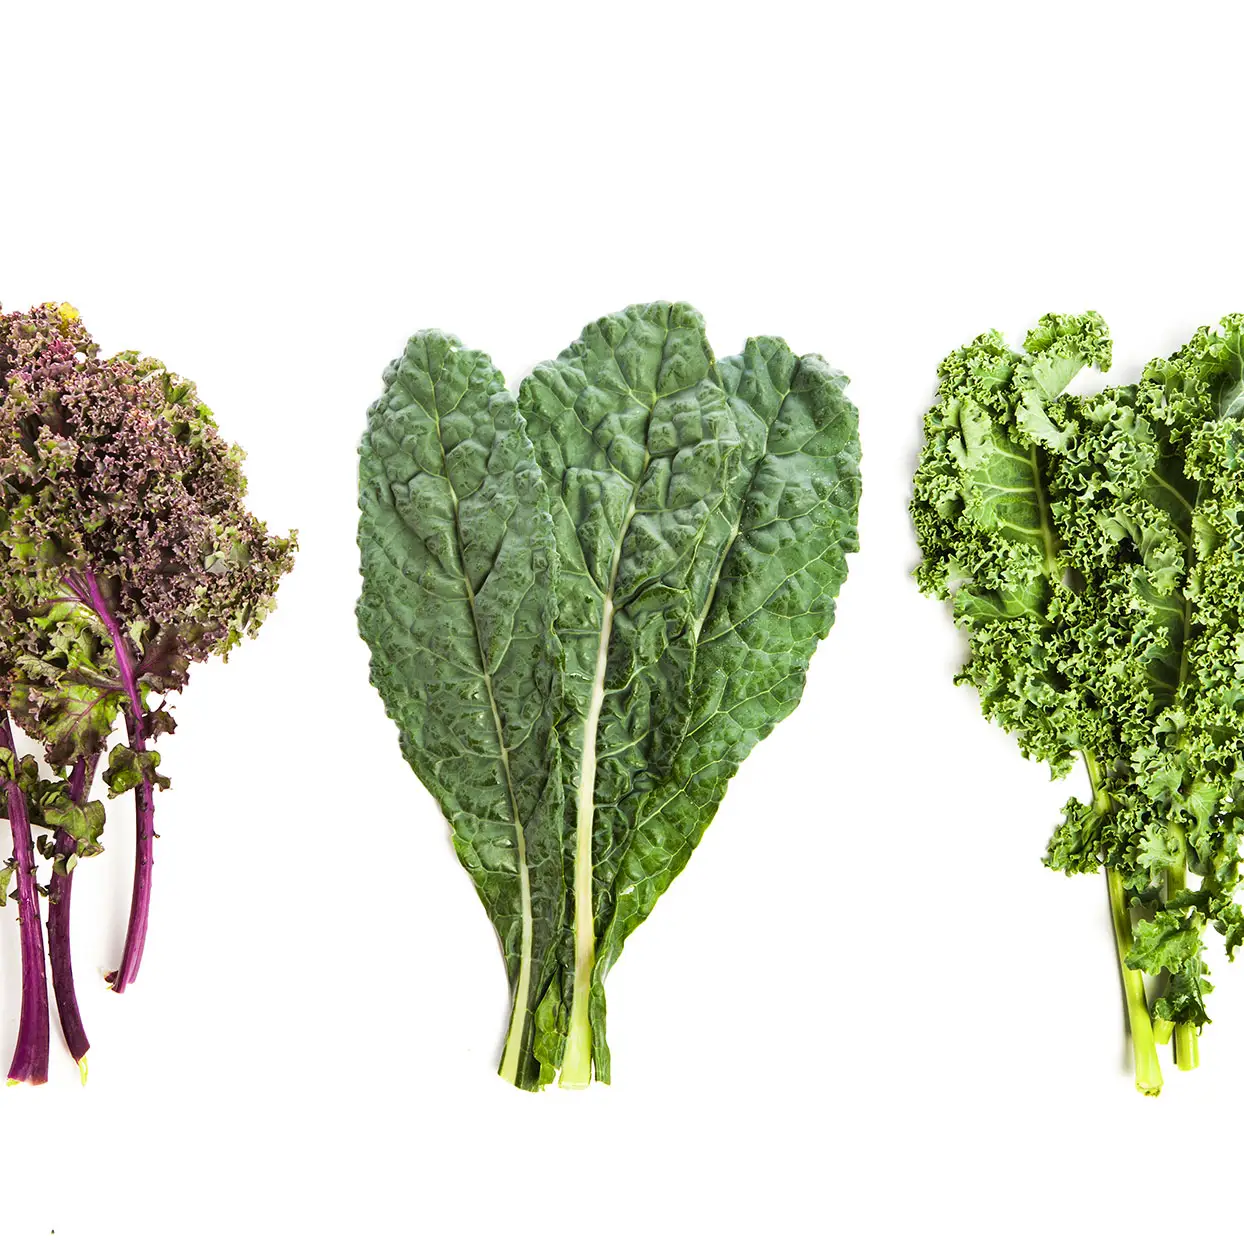 Bulk Frozen kale Vegetables and IQF Vegetables Sell Price